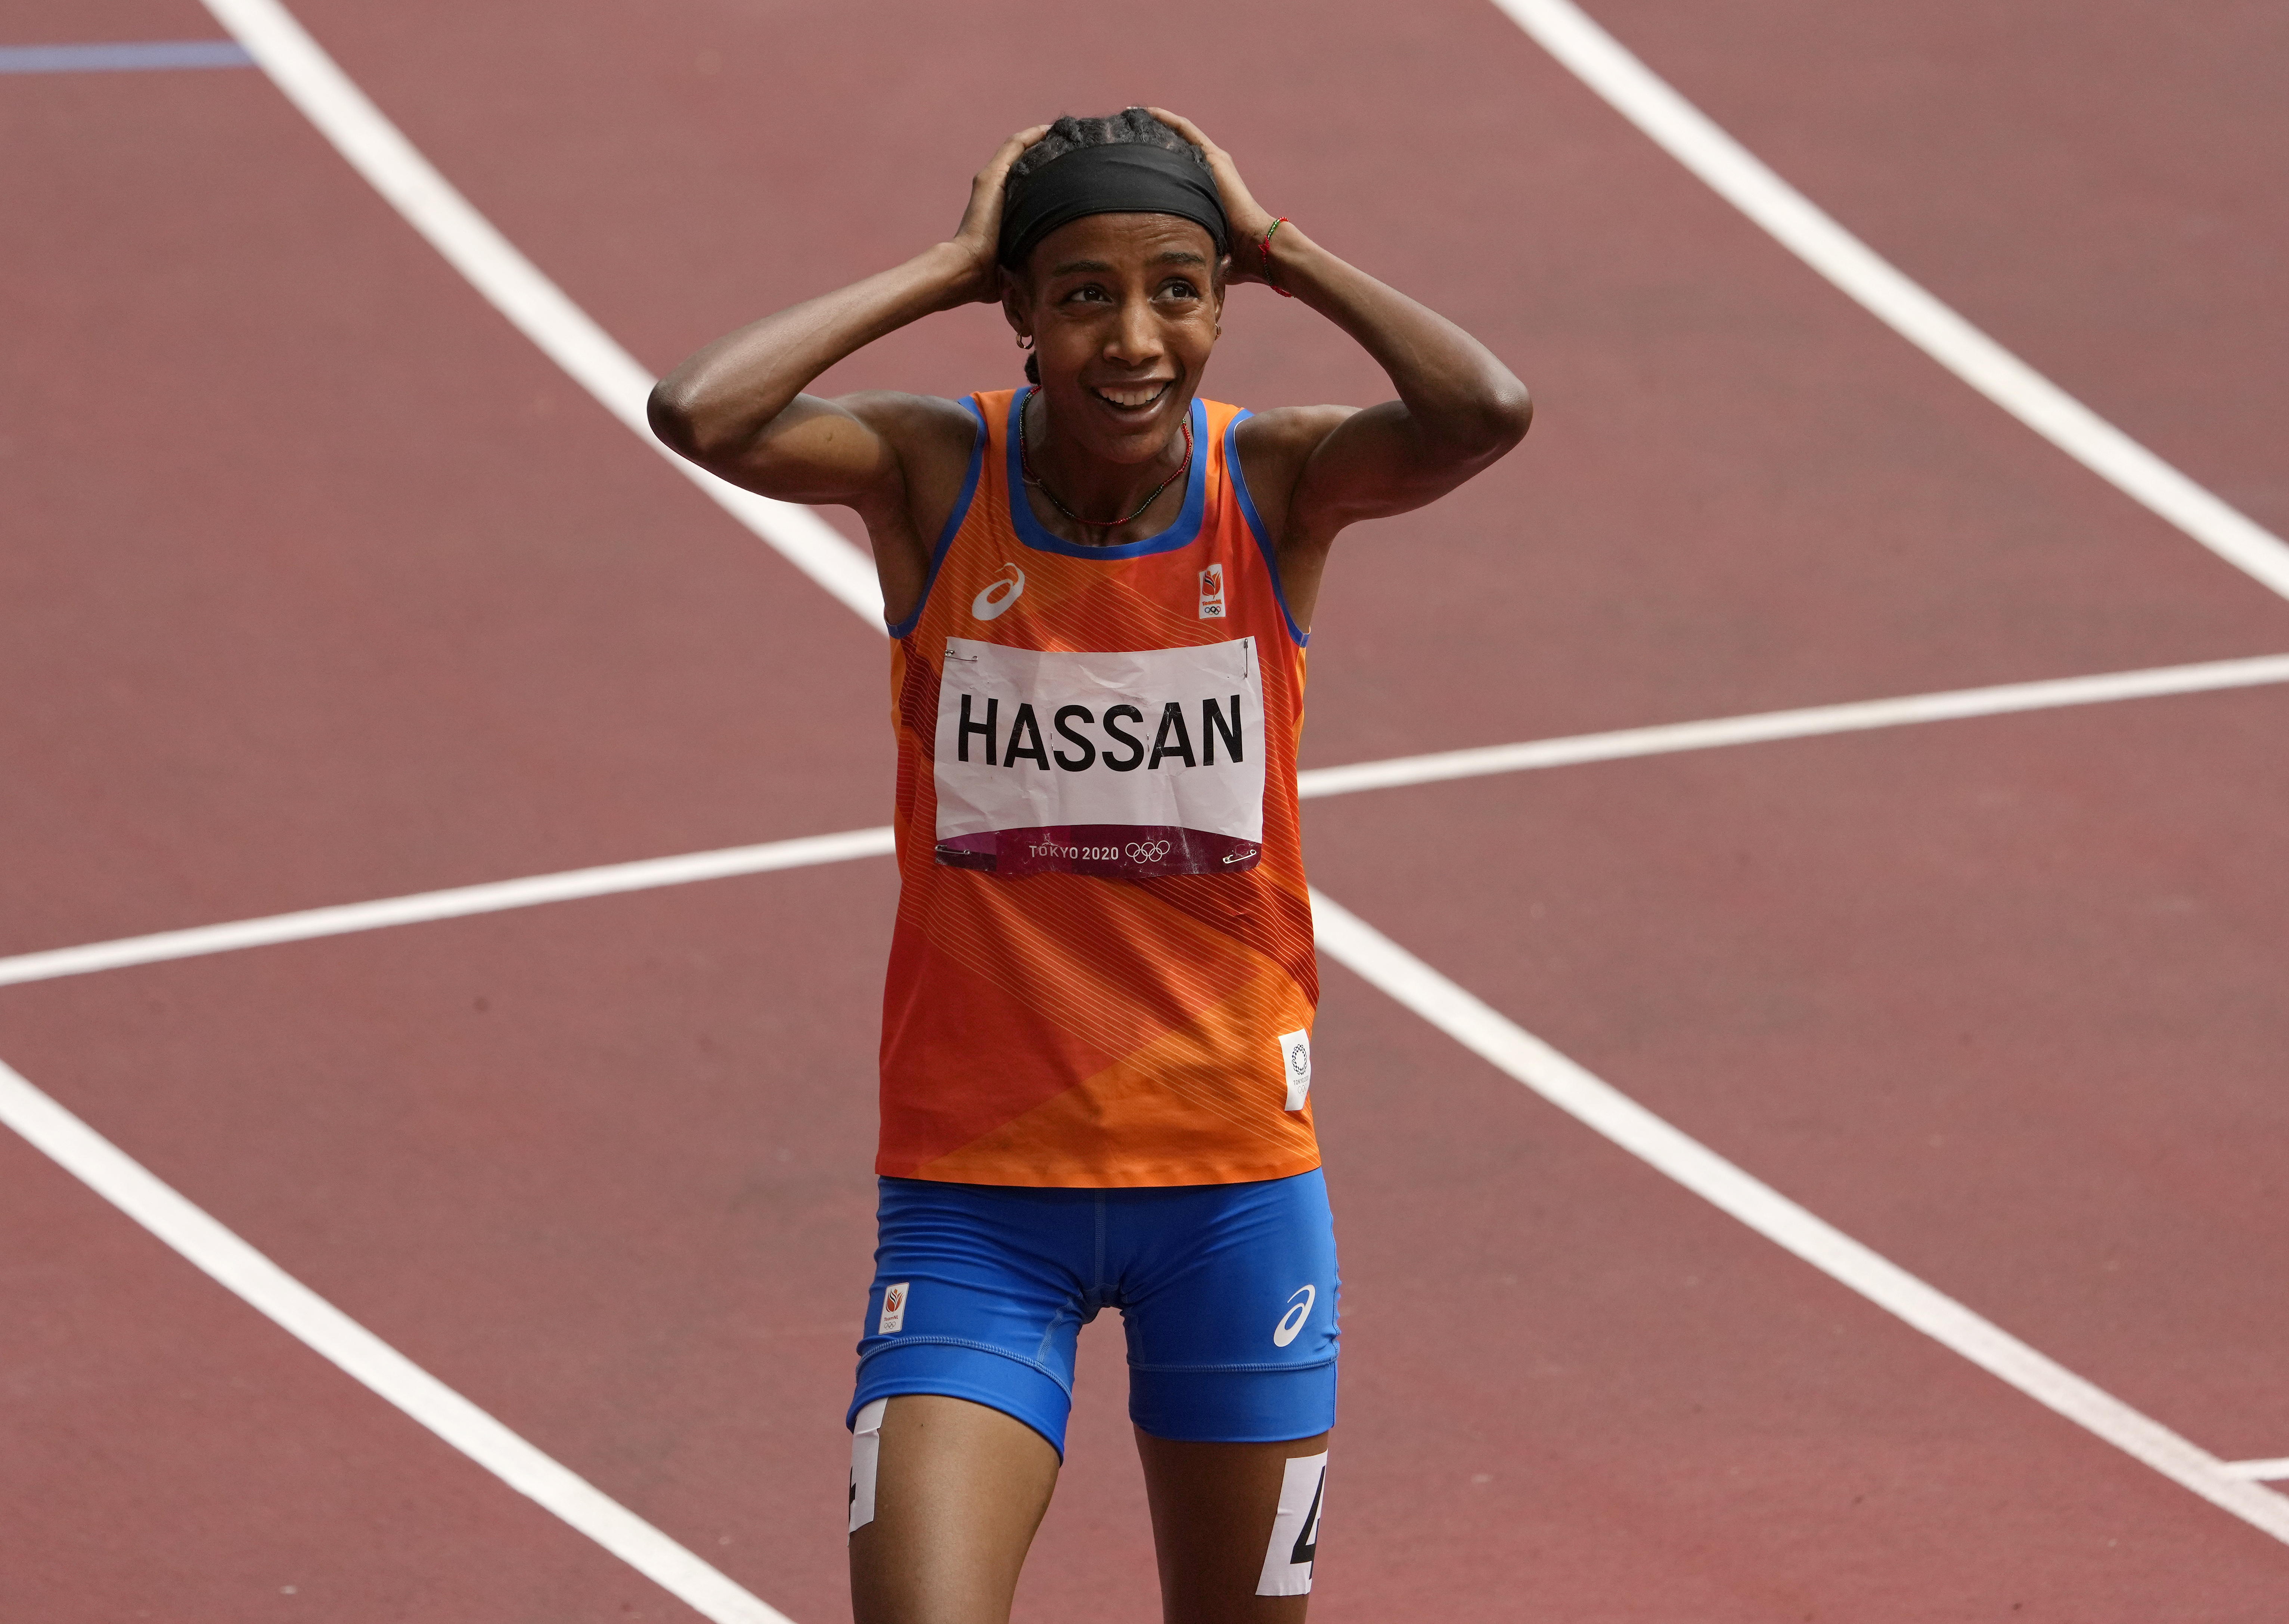 Netherlands' Sifan Hassan falls, gets up and wins 1,500 heat at Tokyo  Olympics 